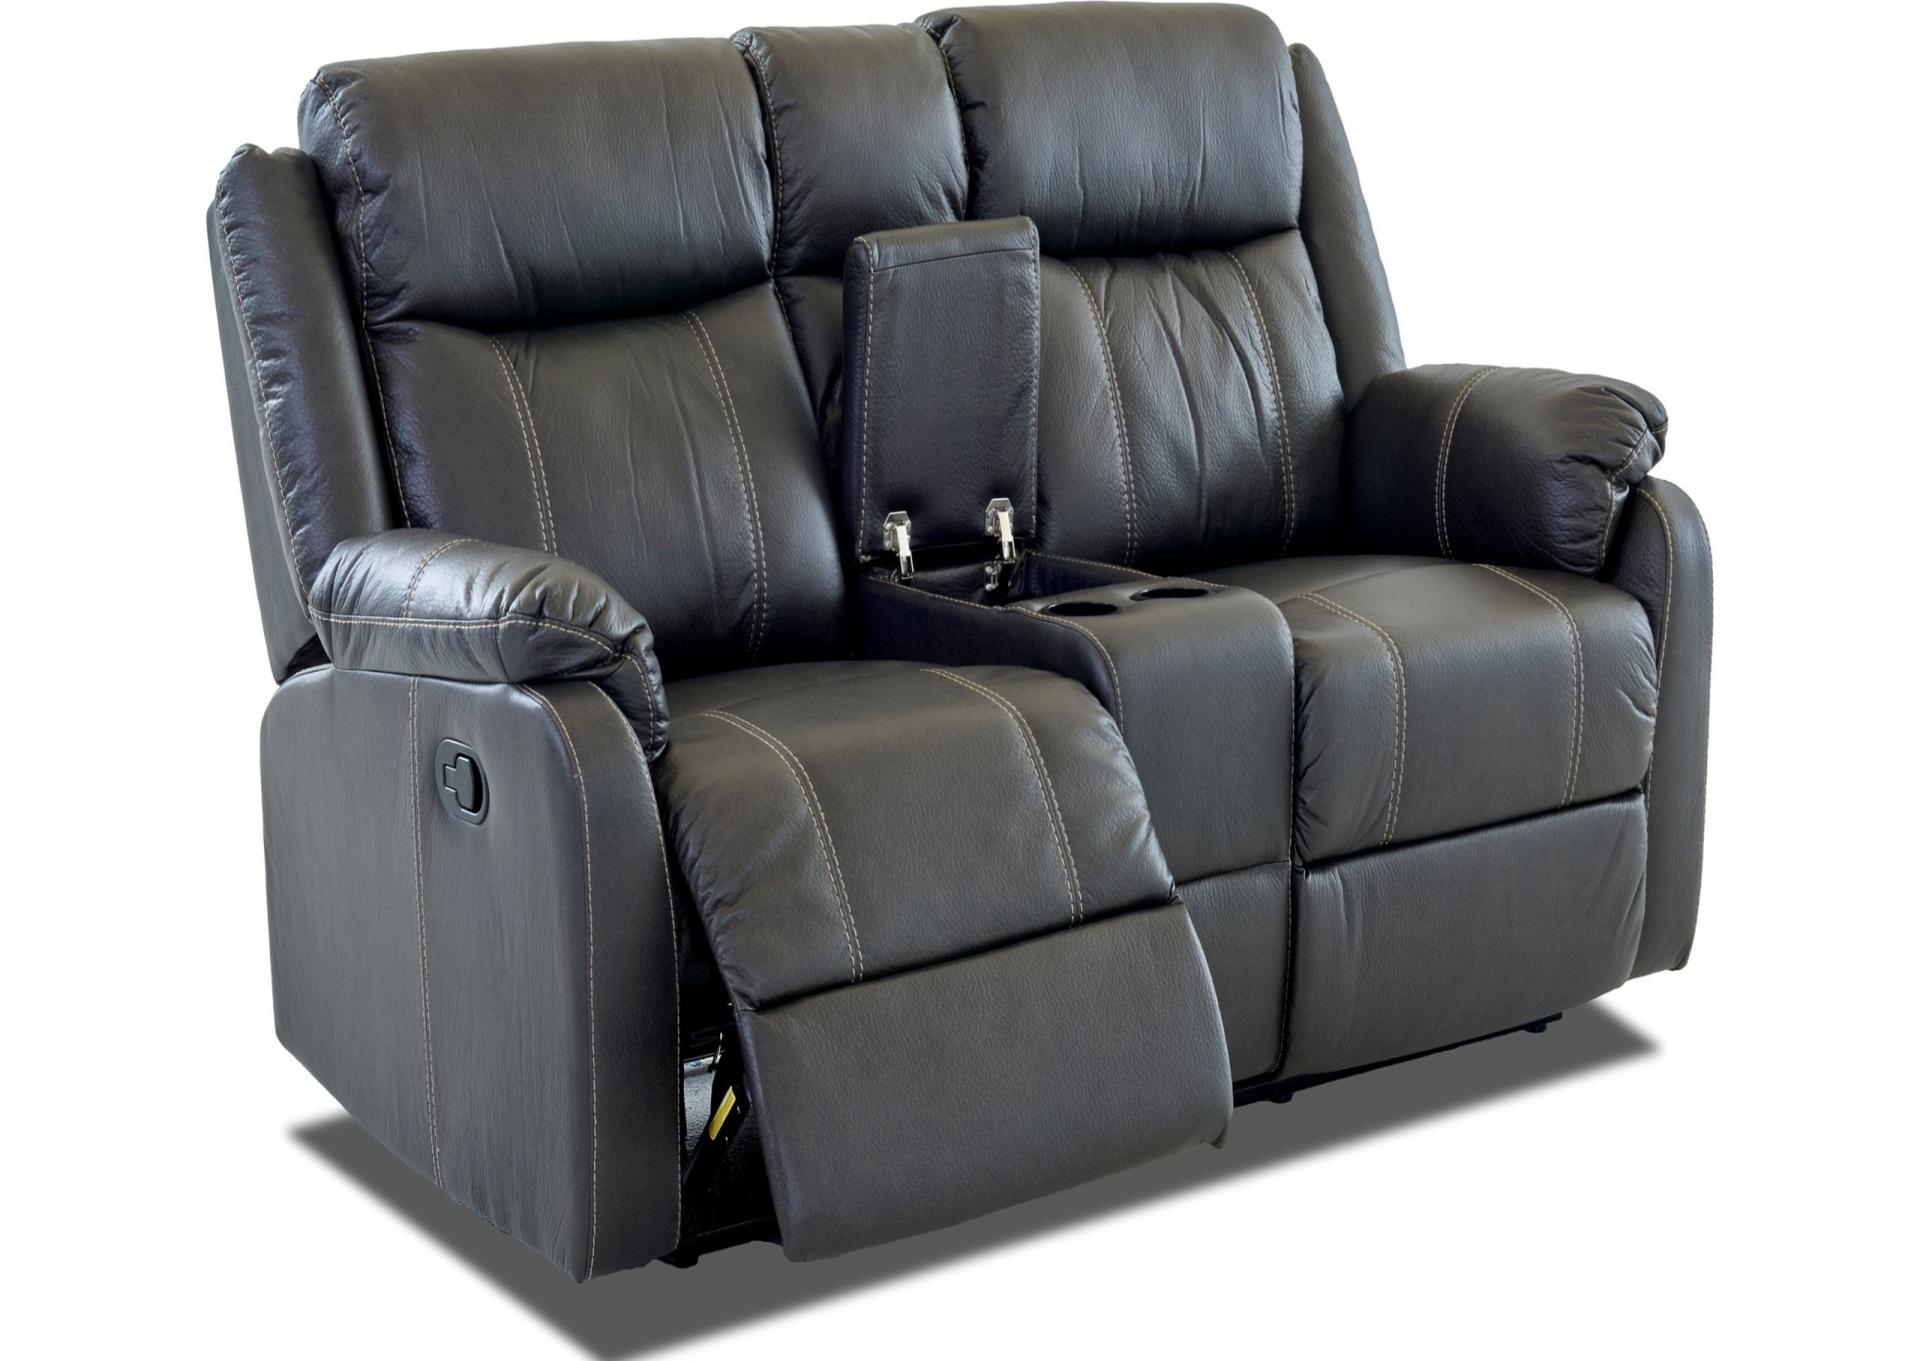 Domino Gray Dual Reclining Sofa with drop down tray and Dual reclining Loveseat